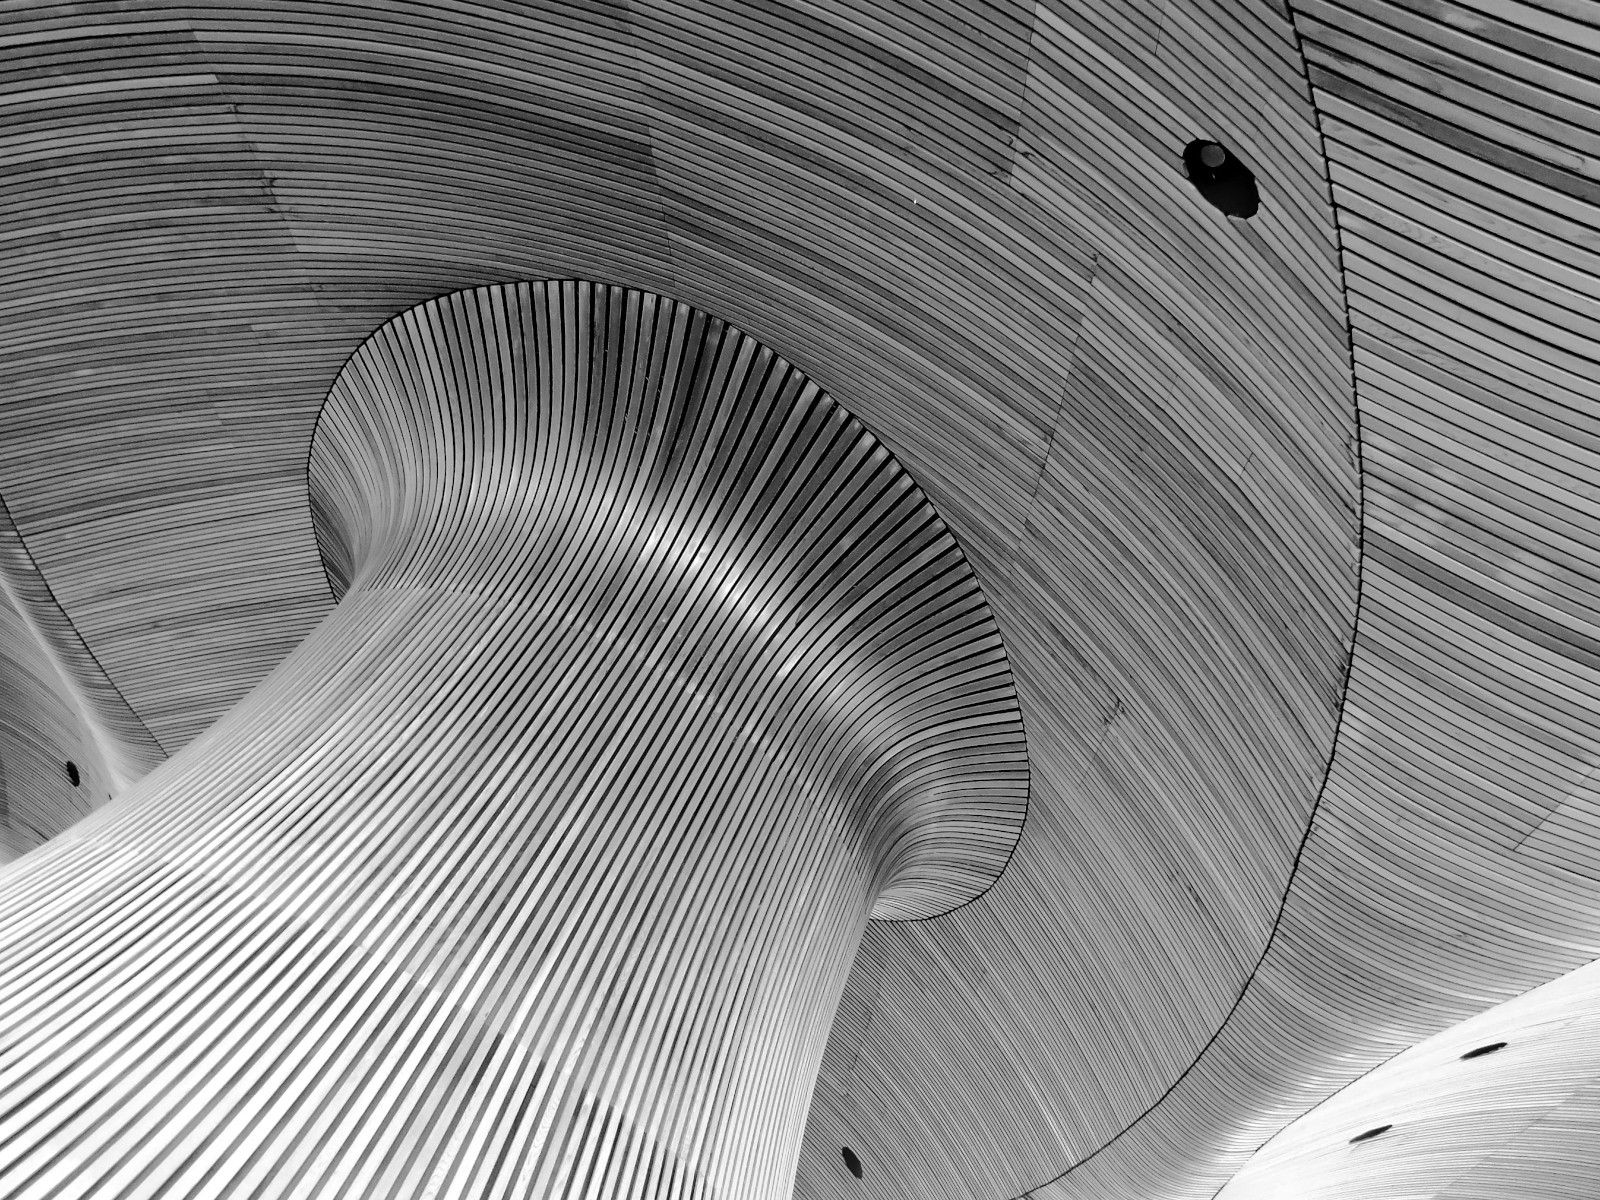 Timber Curved and Undulating, by Carroll Pierce